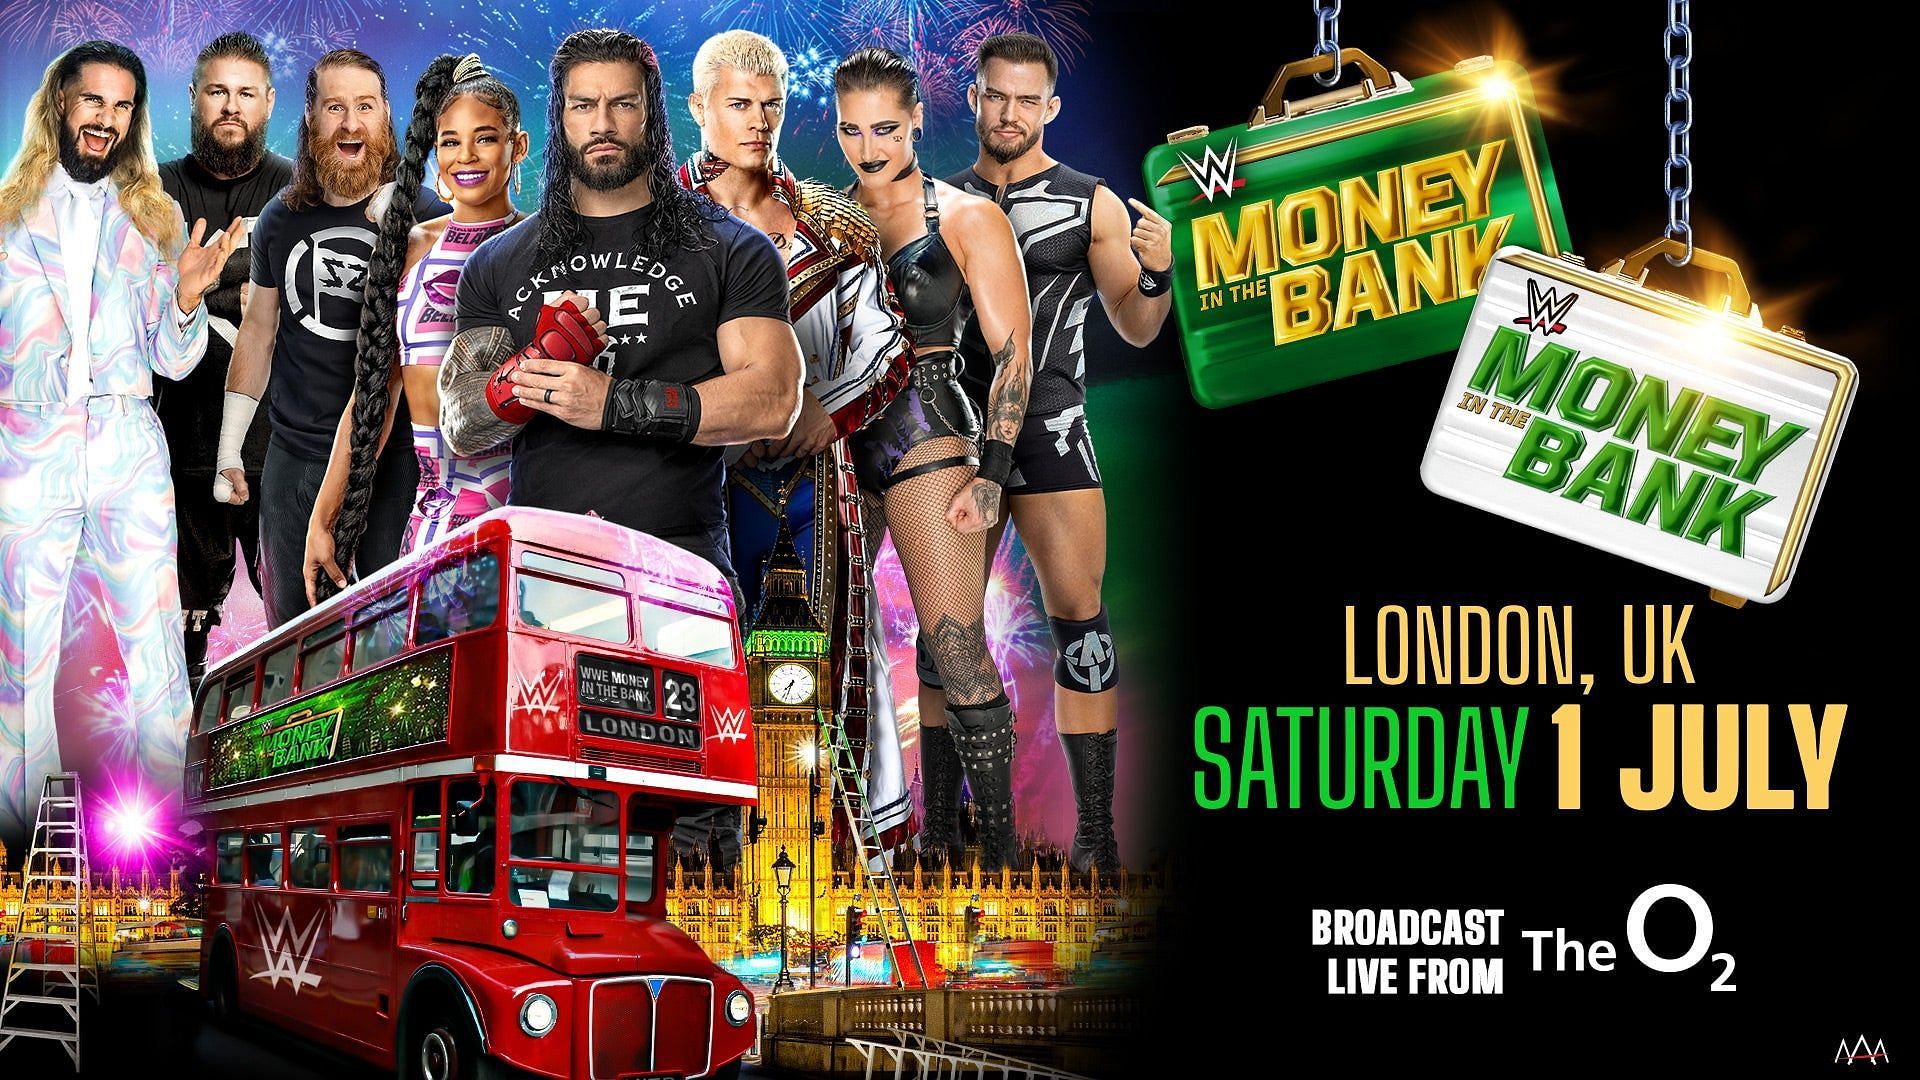 Money in the Bank will take place in London